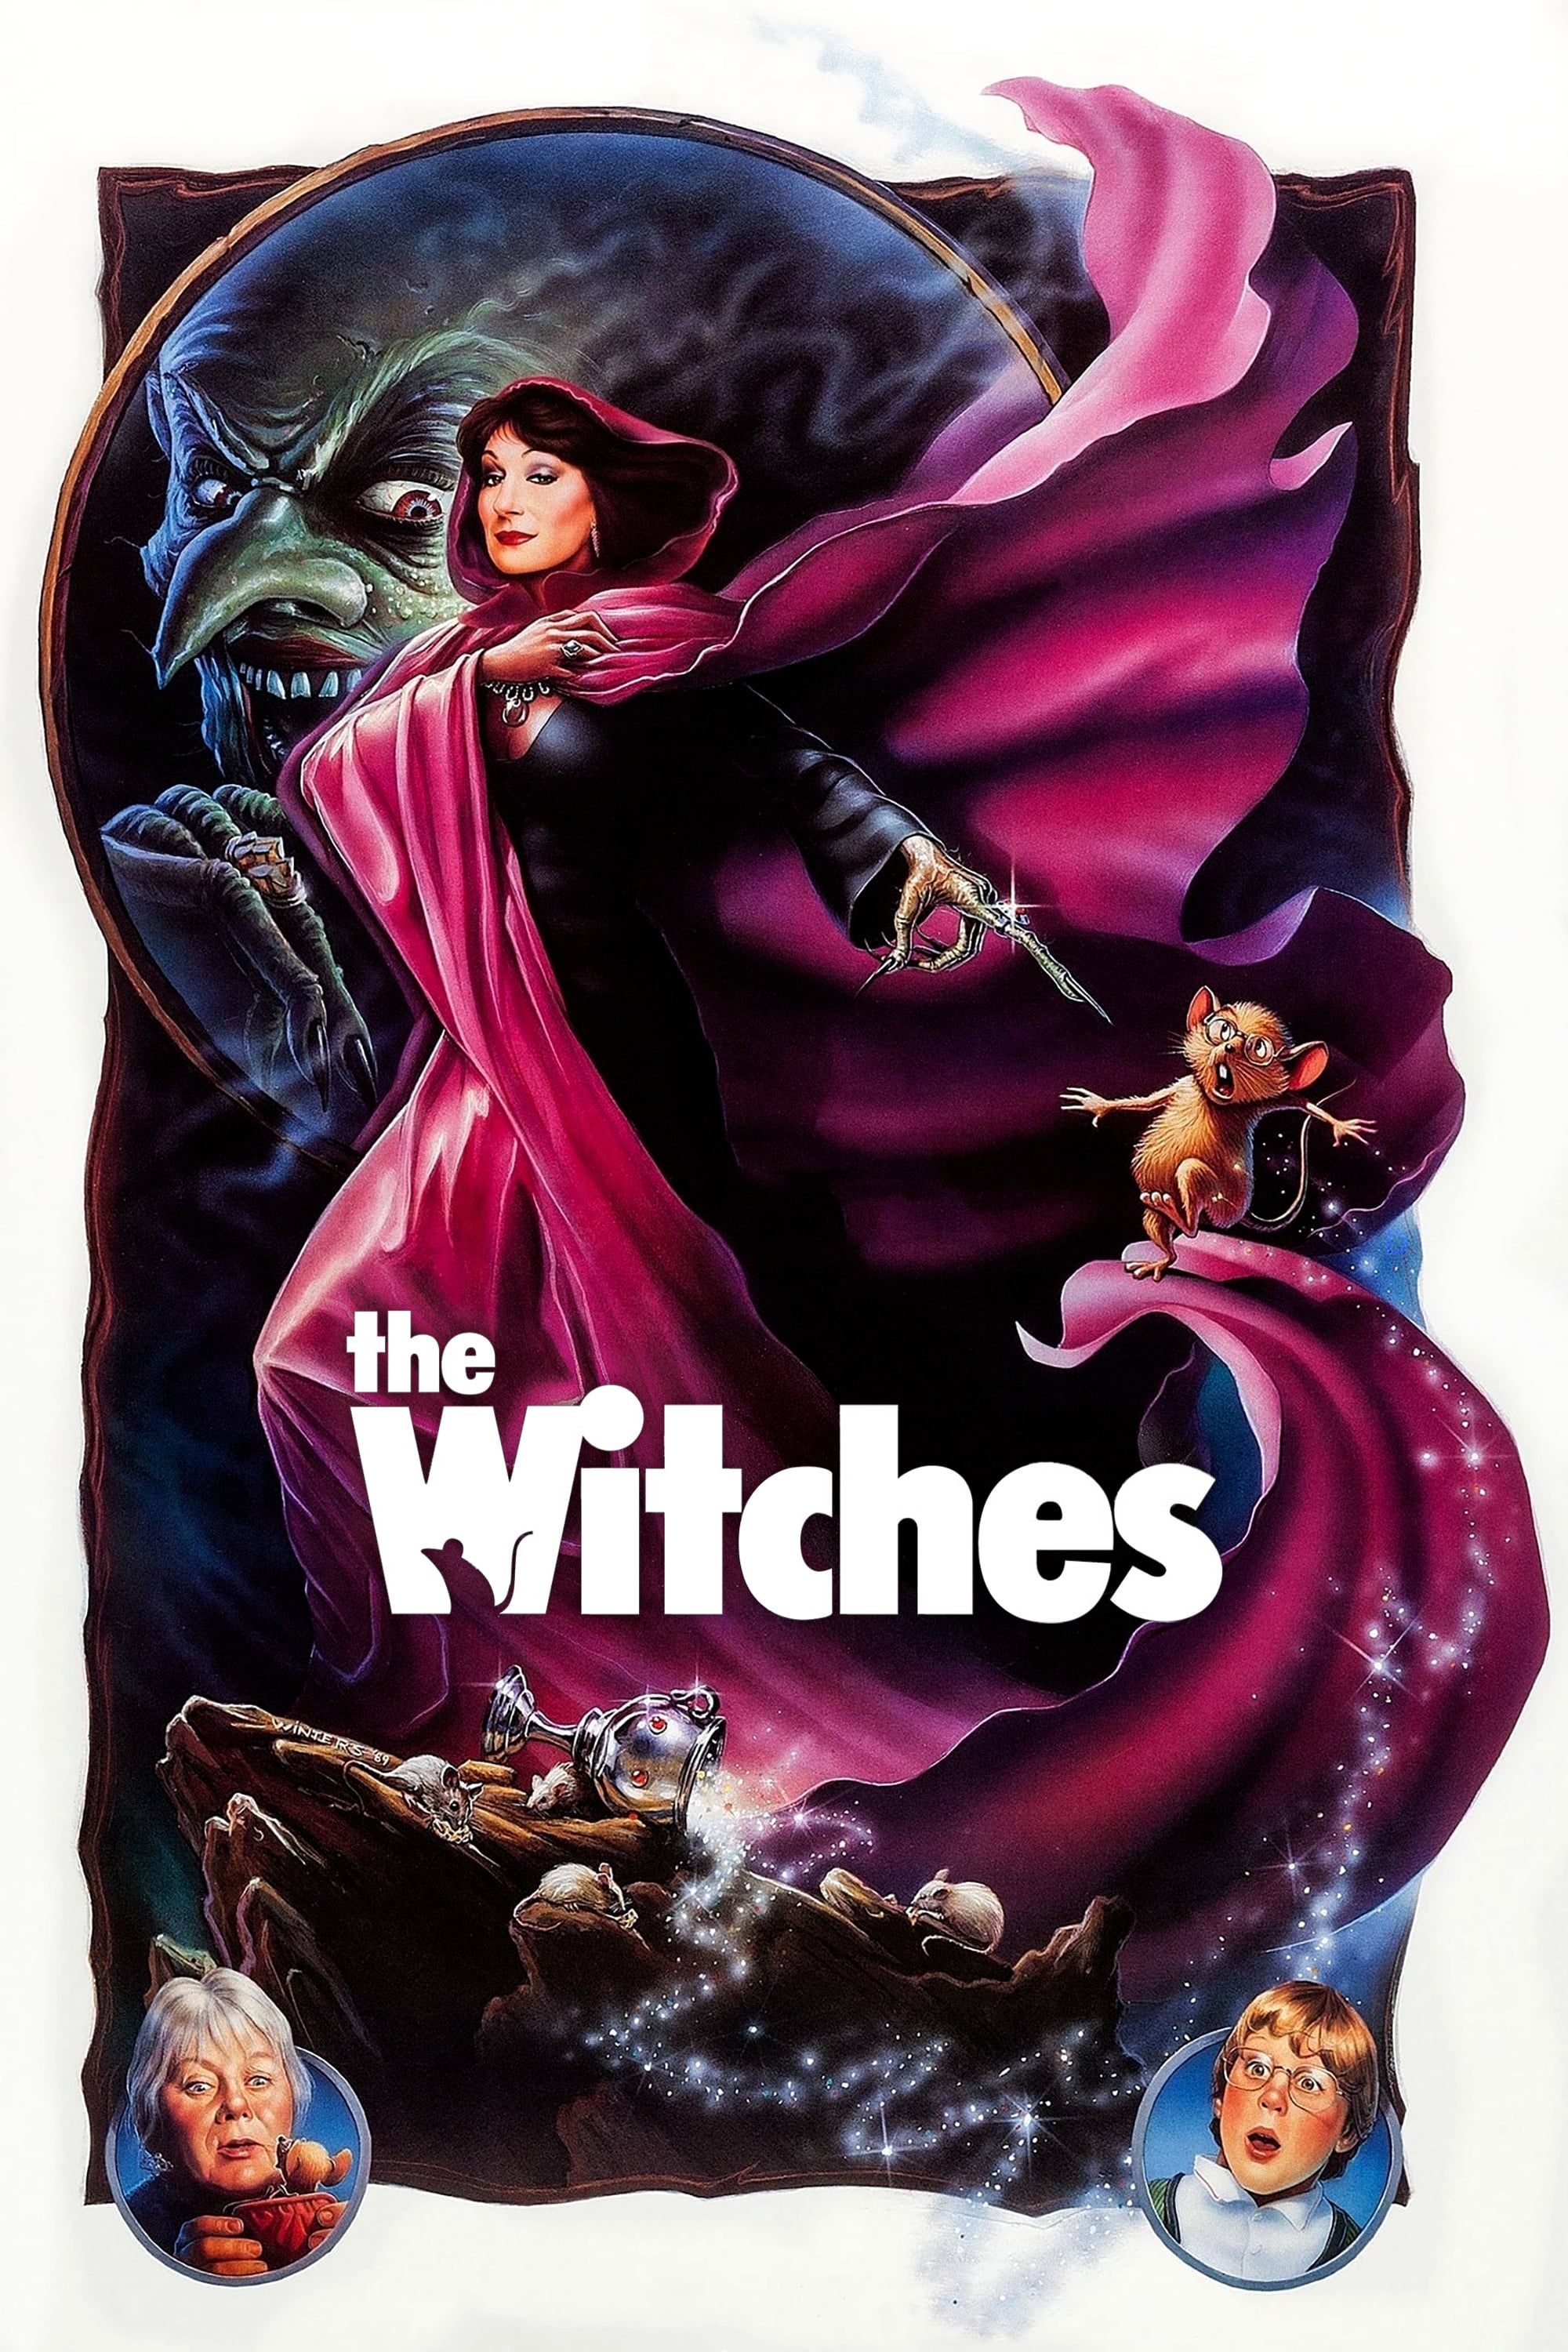 The Witches (1990) Picture